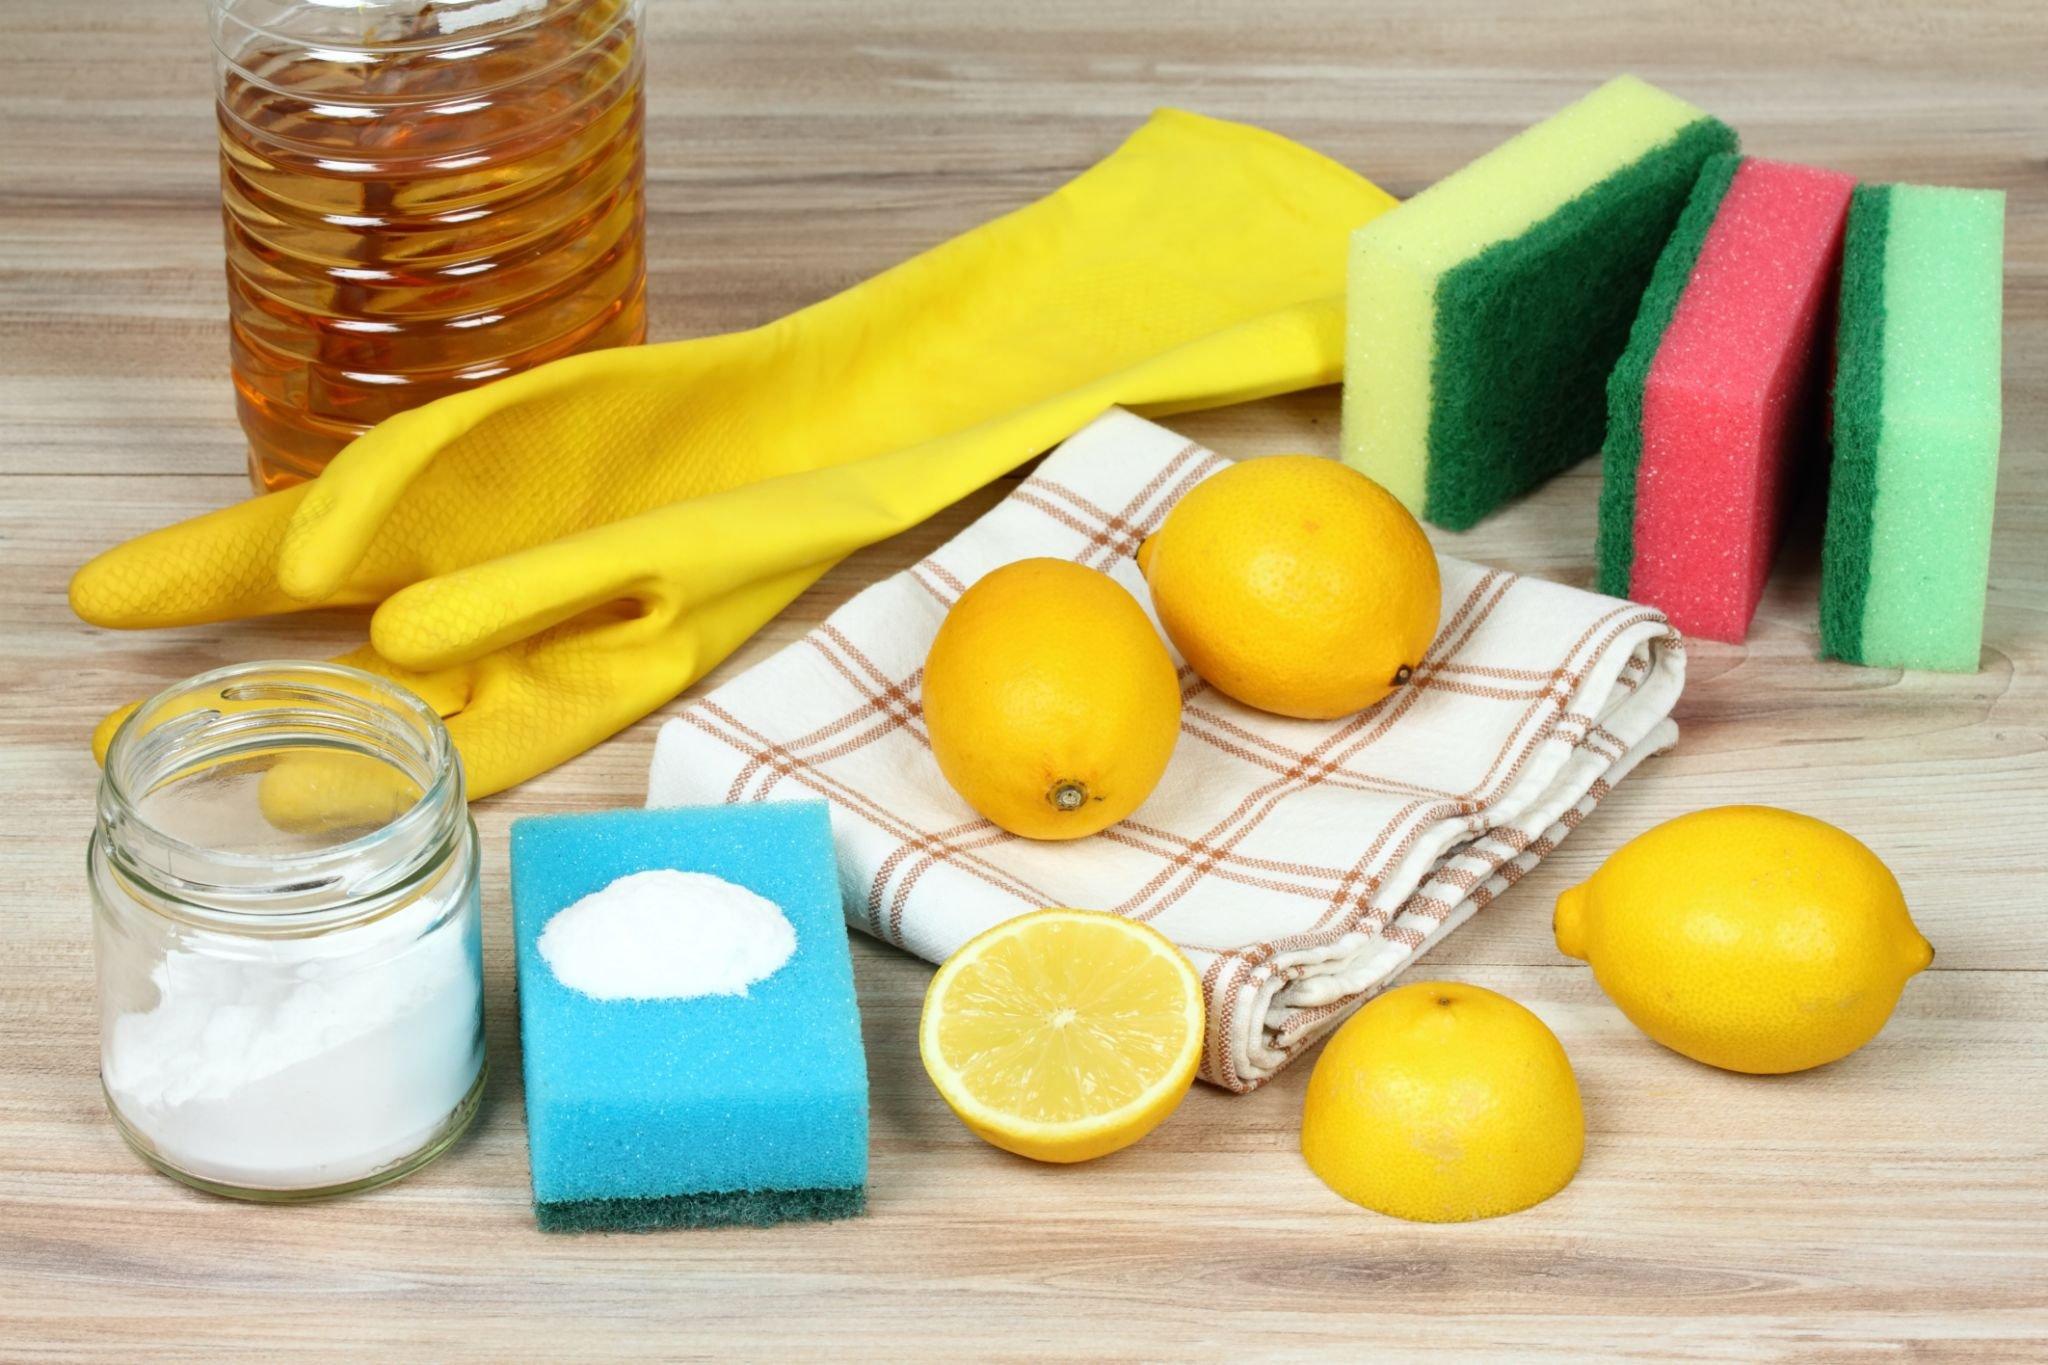 Green Cleaning: How to Clean Your Home Using Natural Ingredients